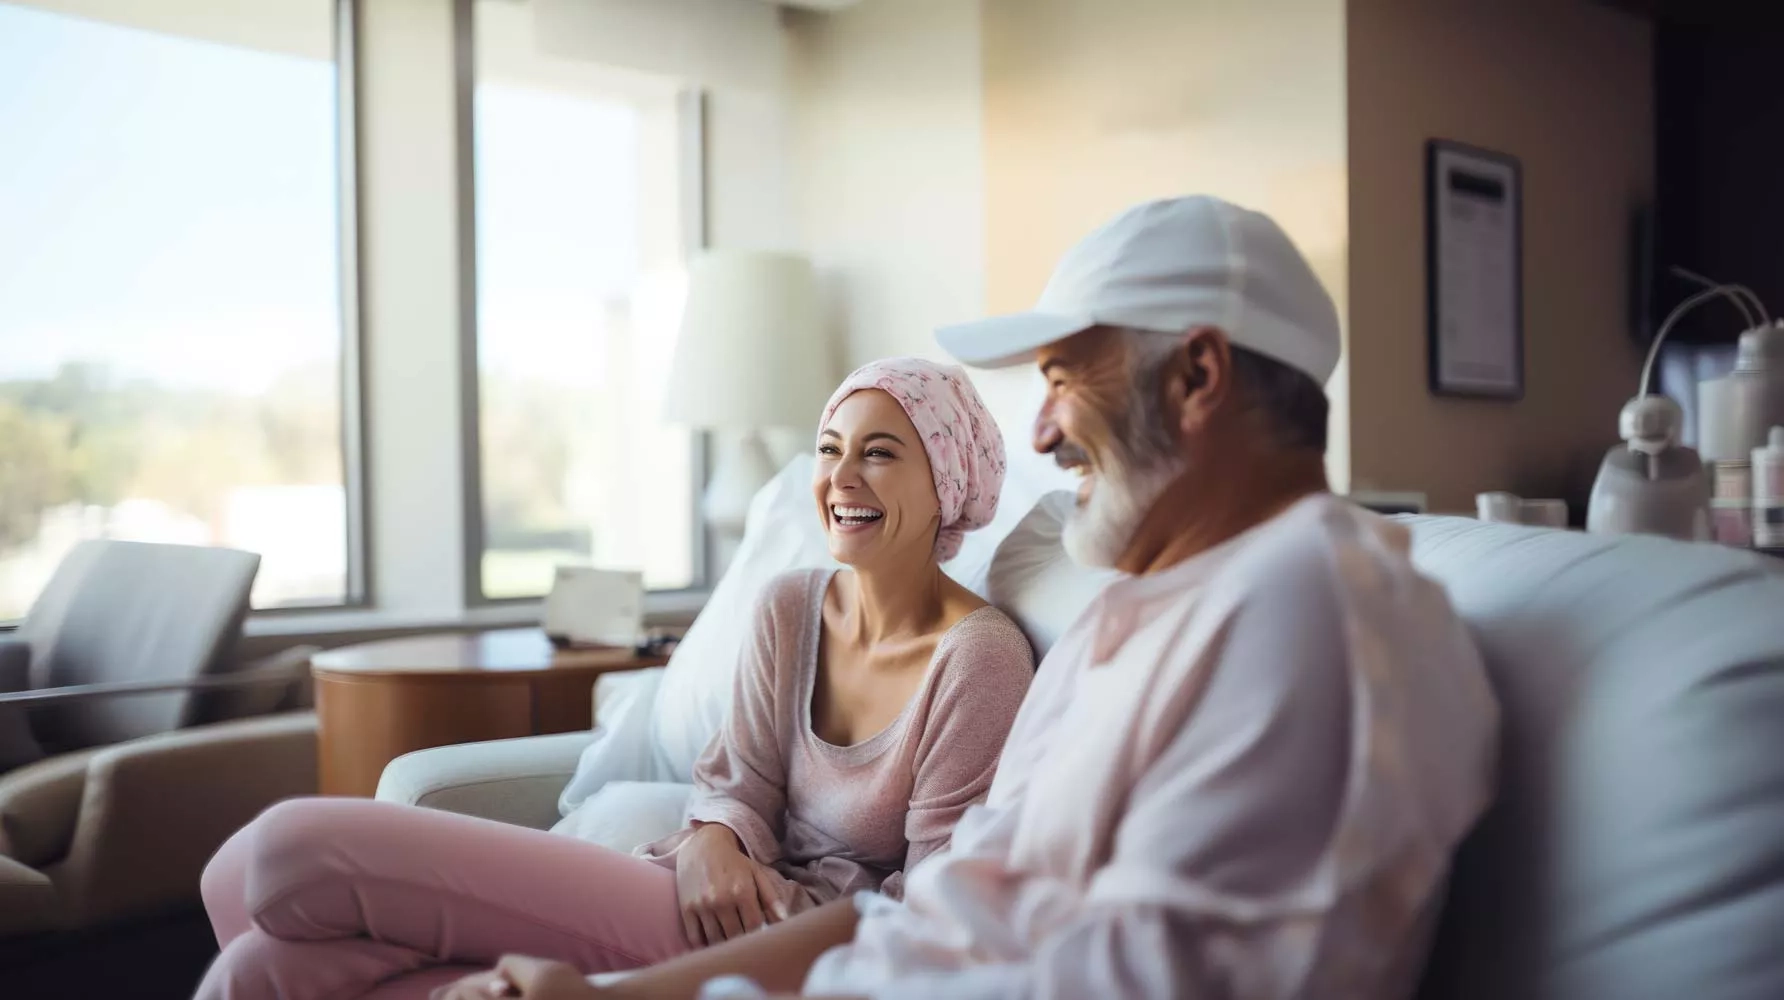 Breast cancer patient laughing in casual setting with husband